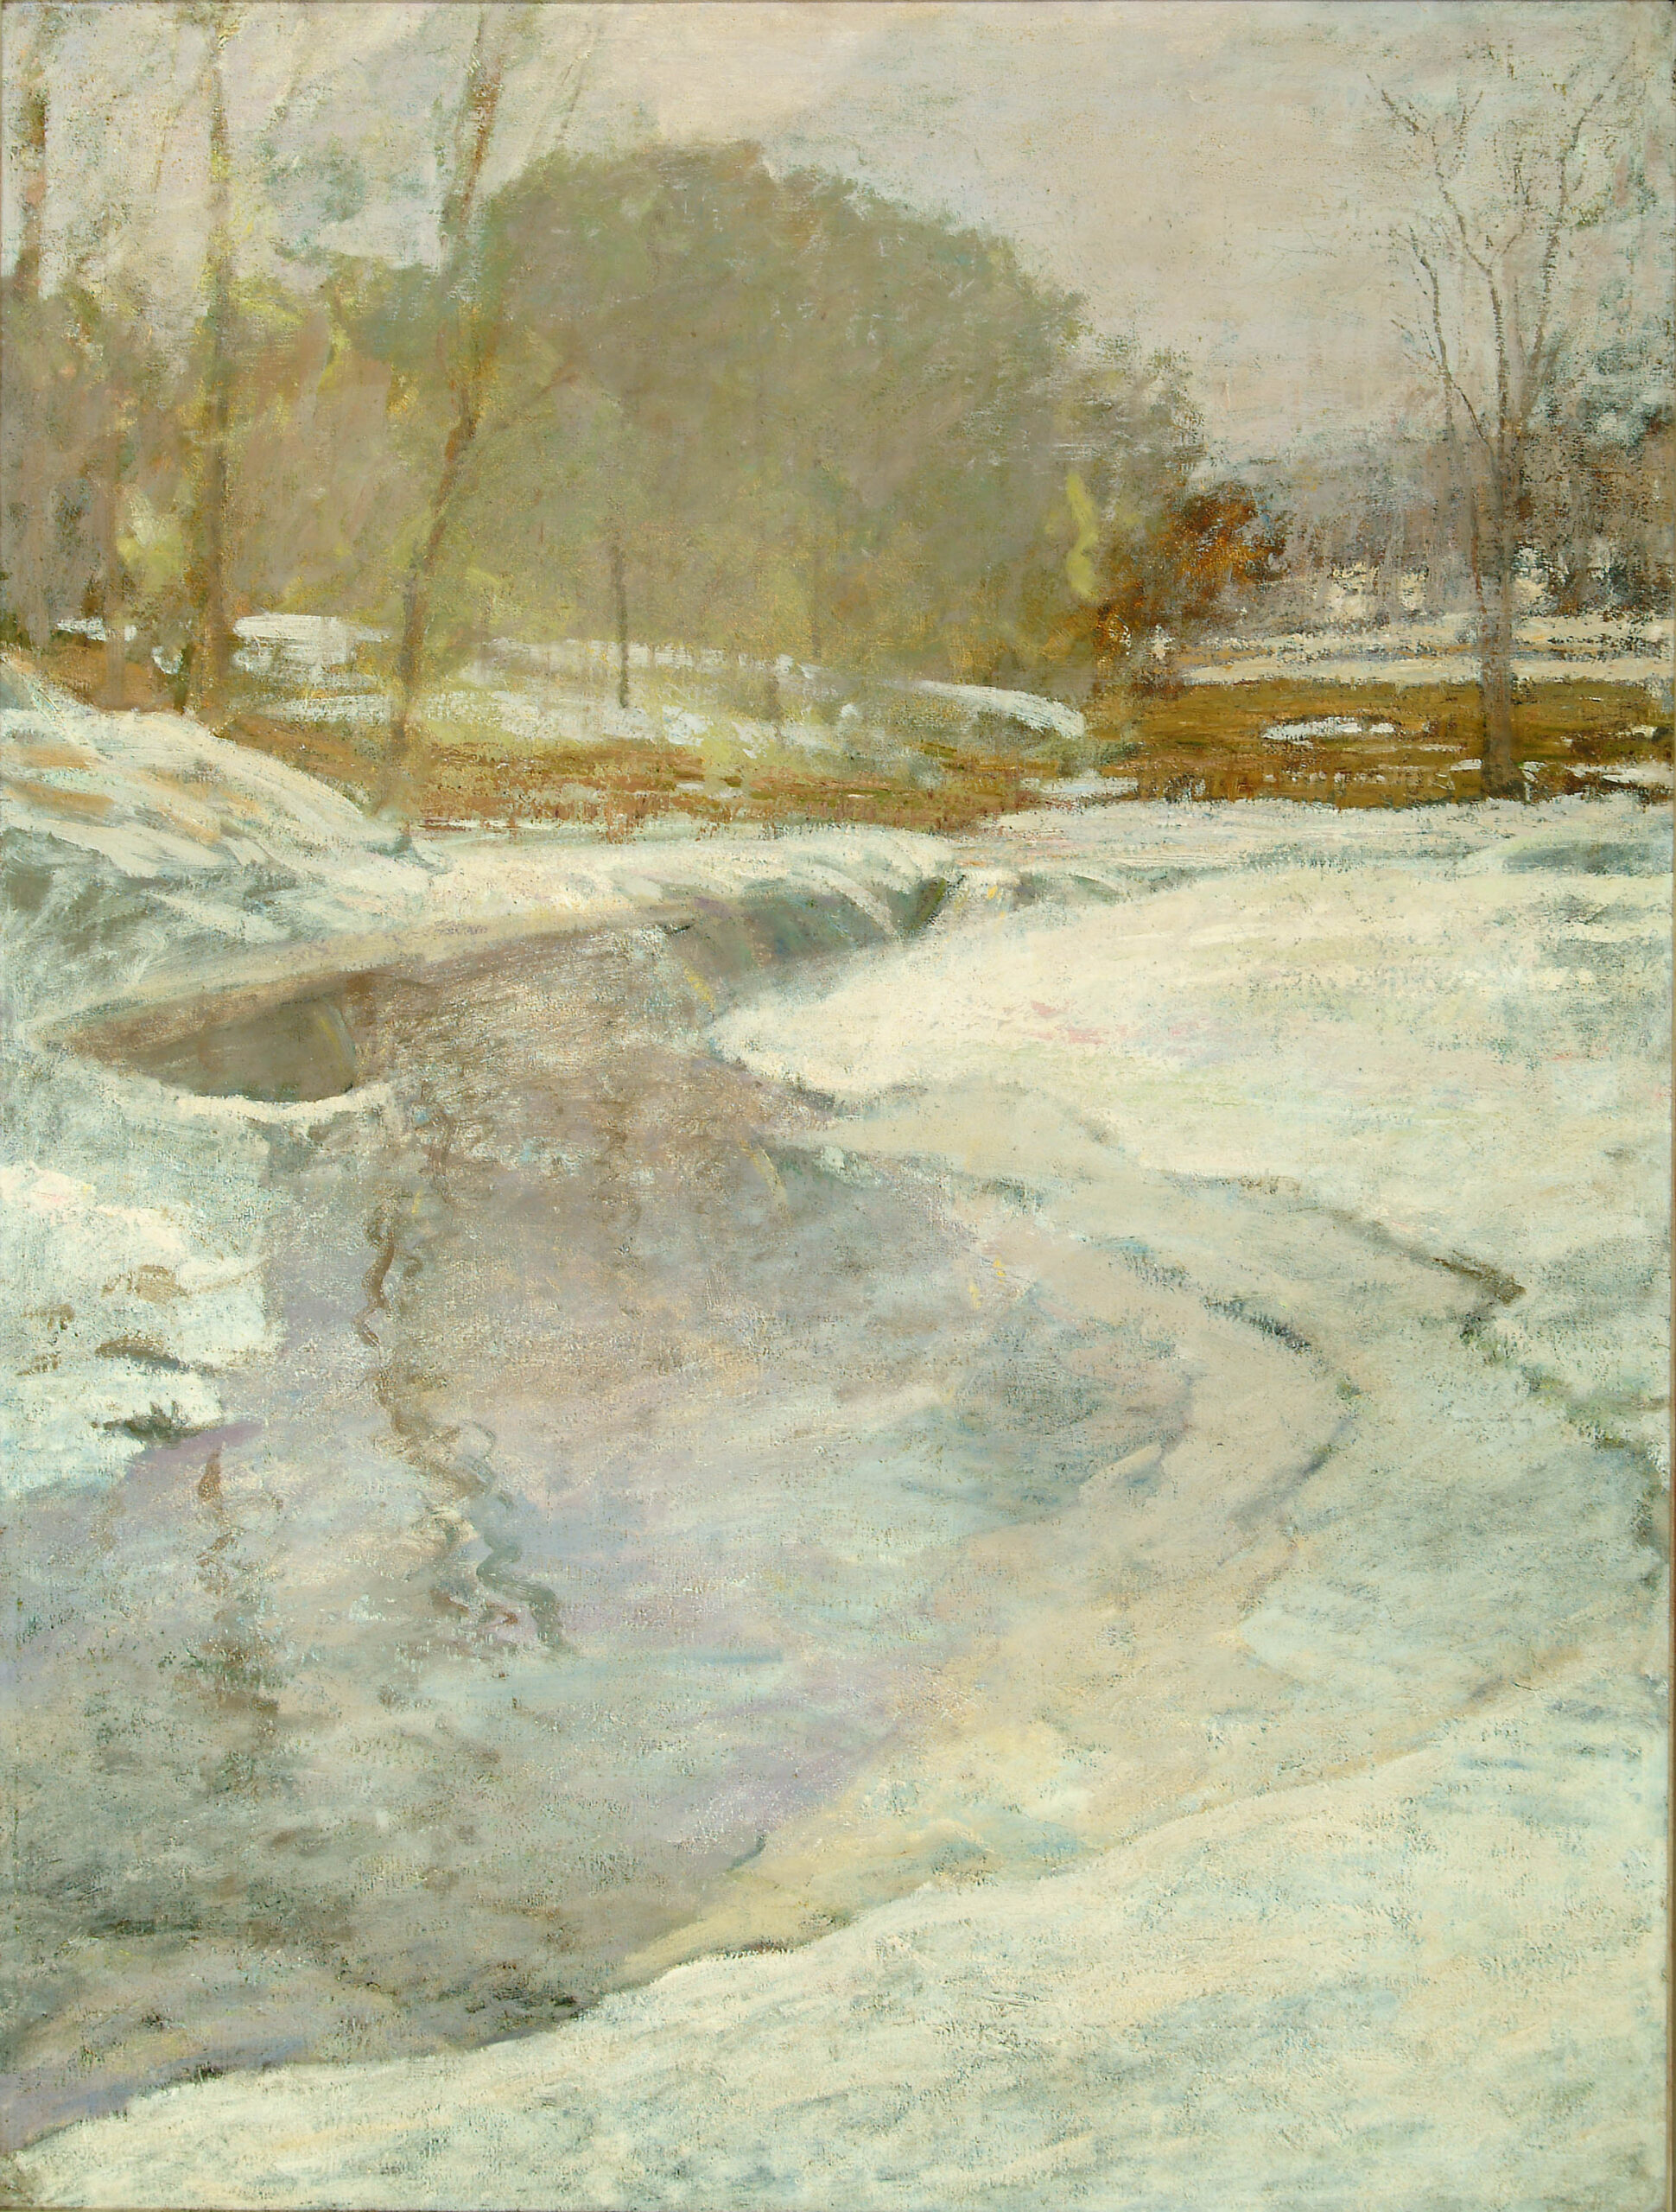 ORRIN SHELDON PARSONS (1866-1943), Stream in Winter – Bronx River, (before 1913), oil on canvas, 50 x 38 inches